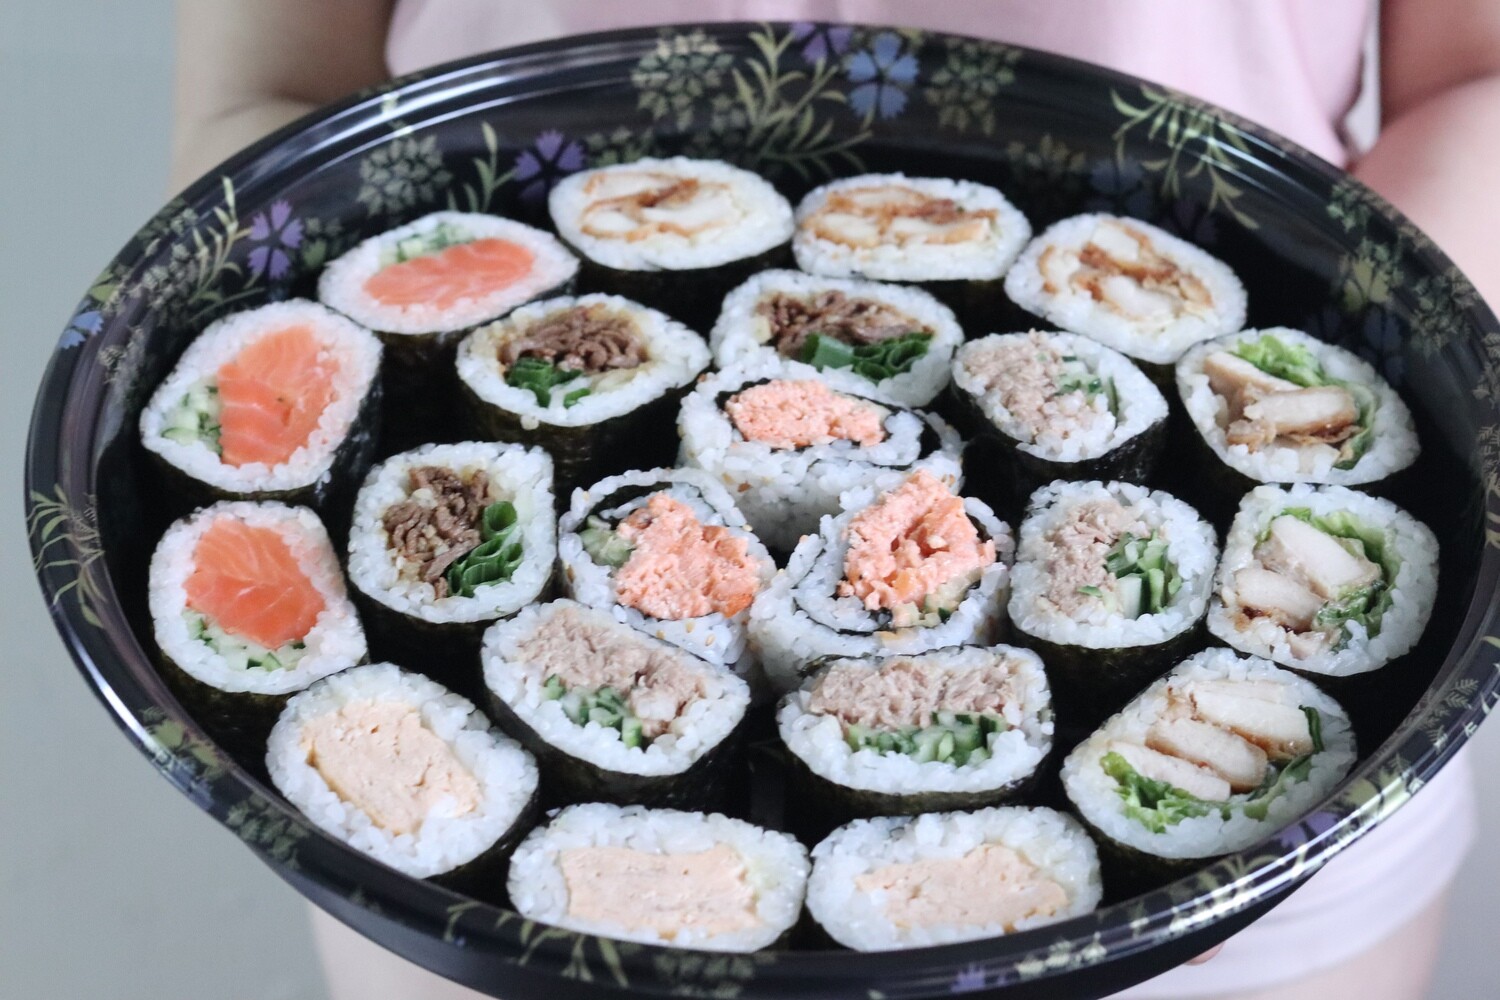 PROMO: RM60 for 4 Sushi Roll